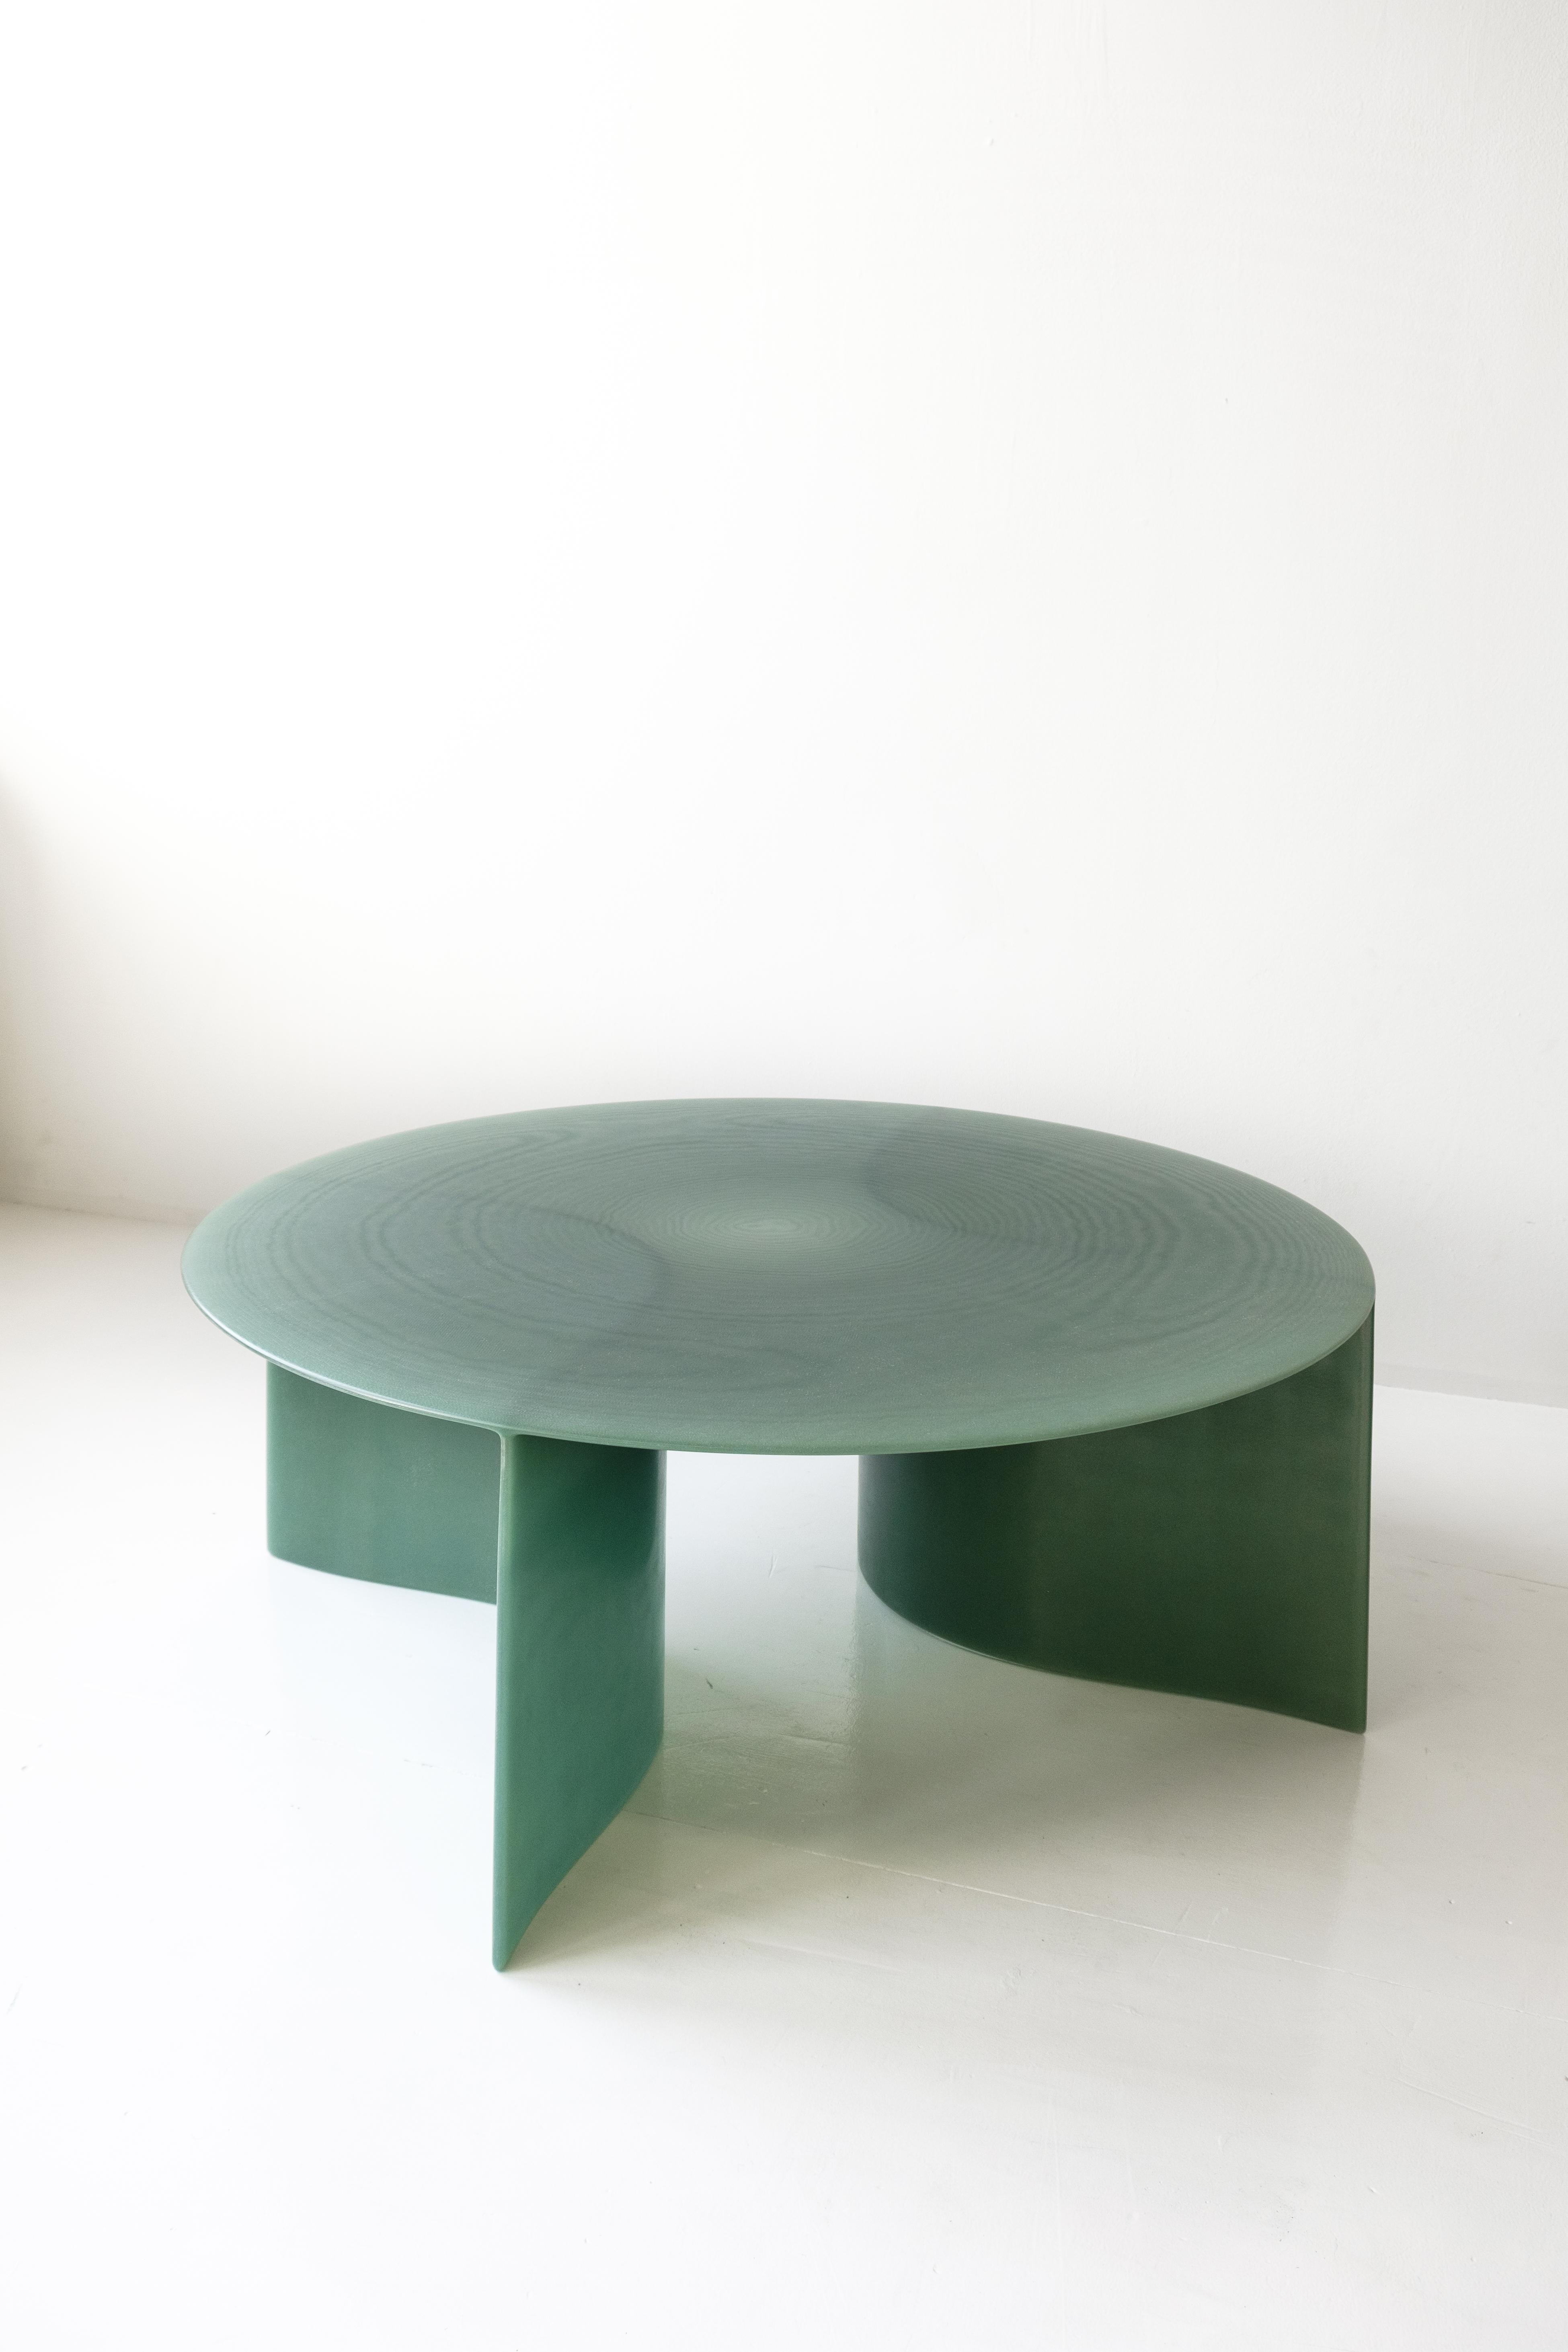 Contemporary Green Fiberglass, New Wave Coffee Table Round 120cm, by Lukas Cober 1